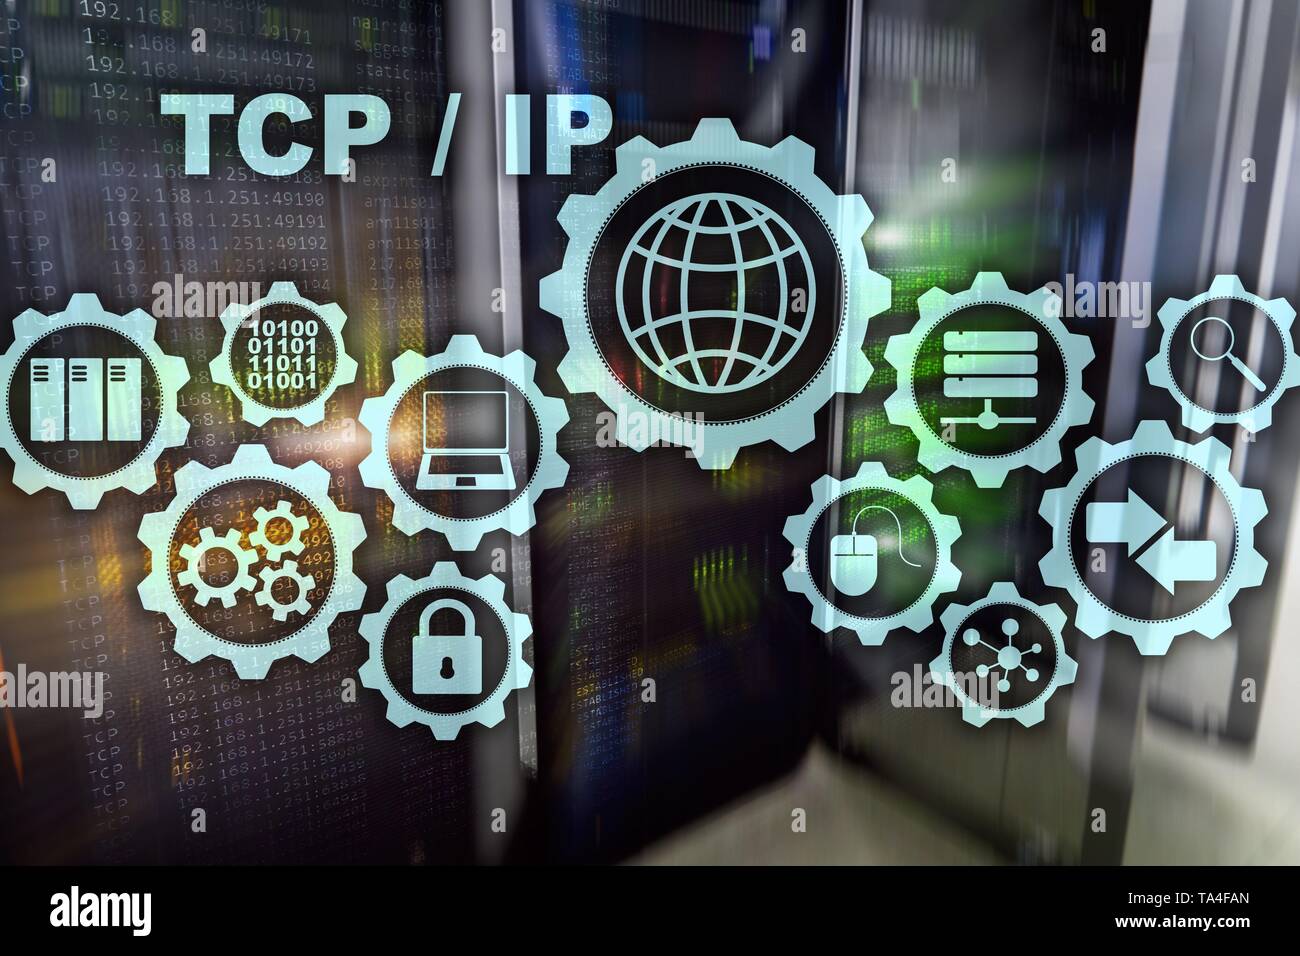 Tcp ip networking. Transmission Control Protocol. Internet Technology concept. Stock Photo